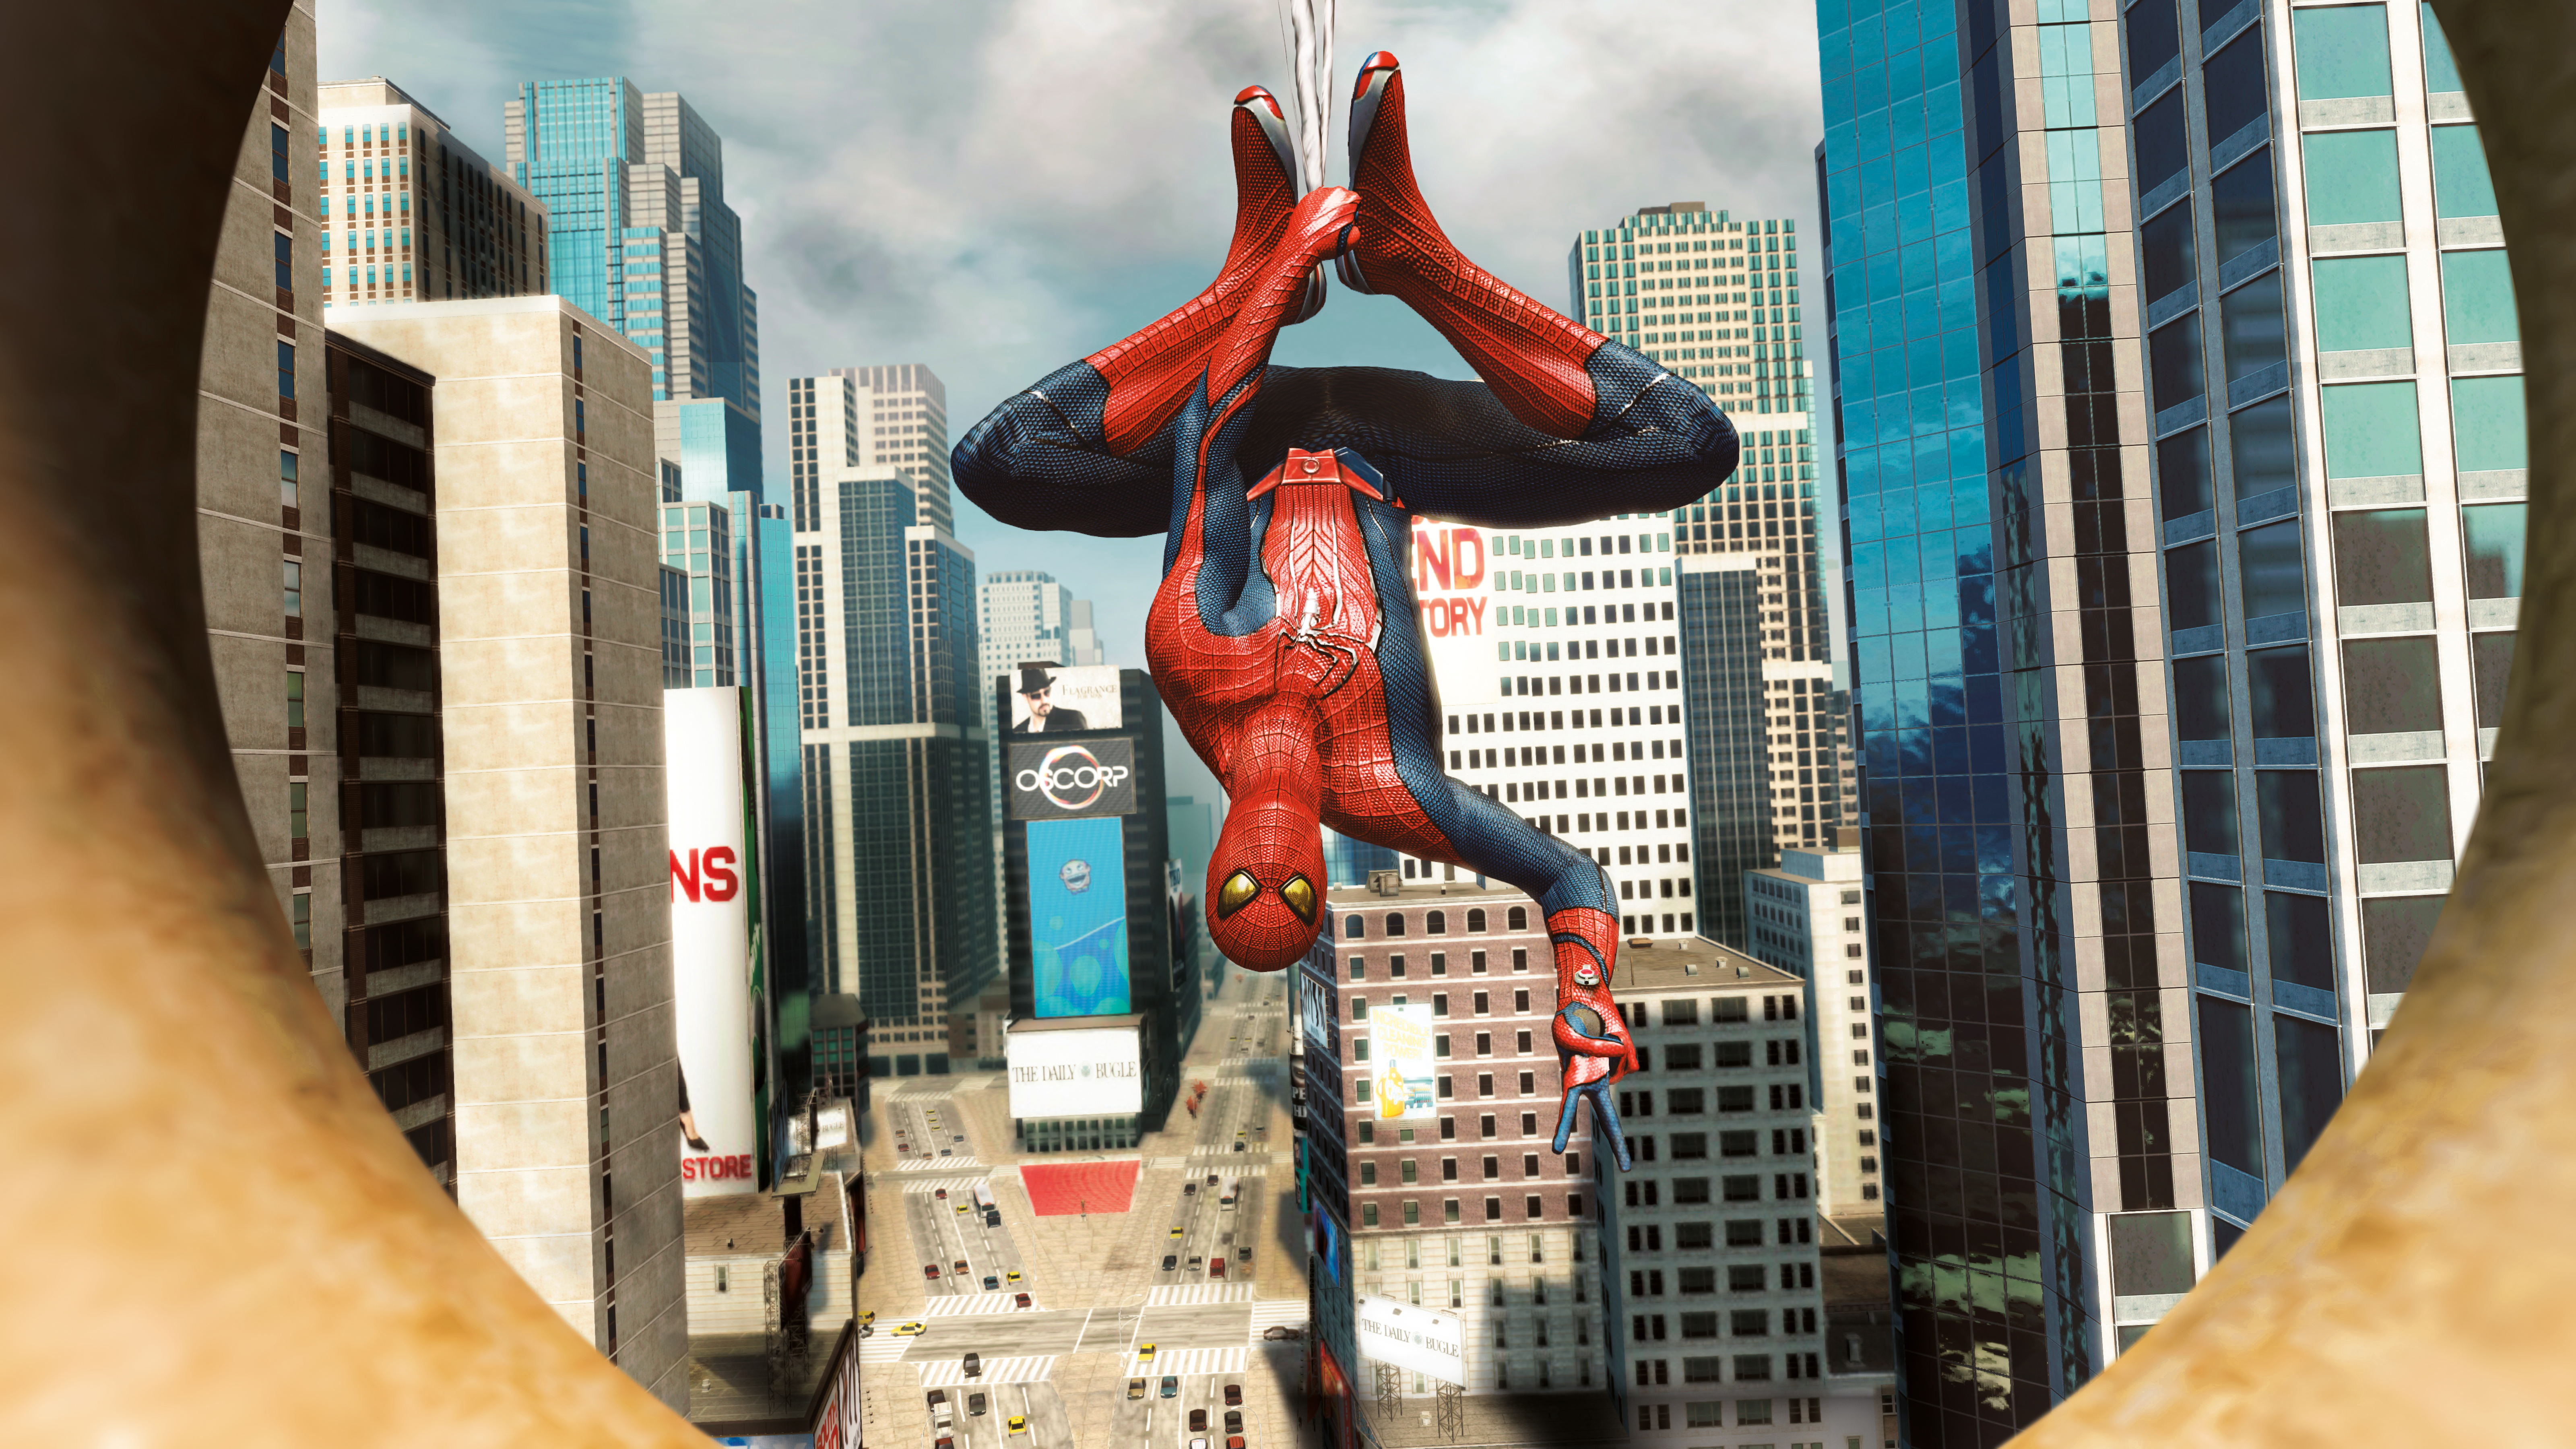 the amazing spider man 2012 video game